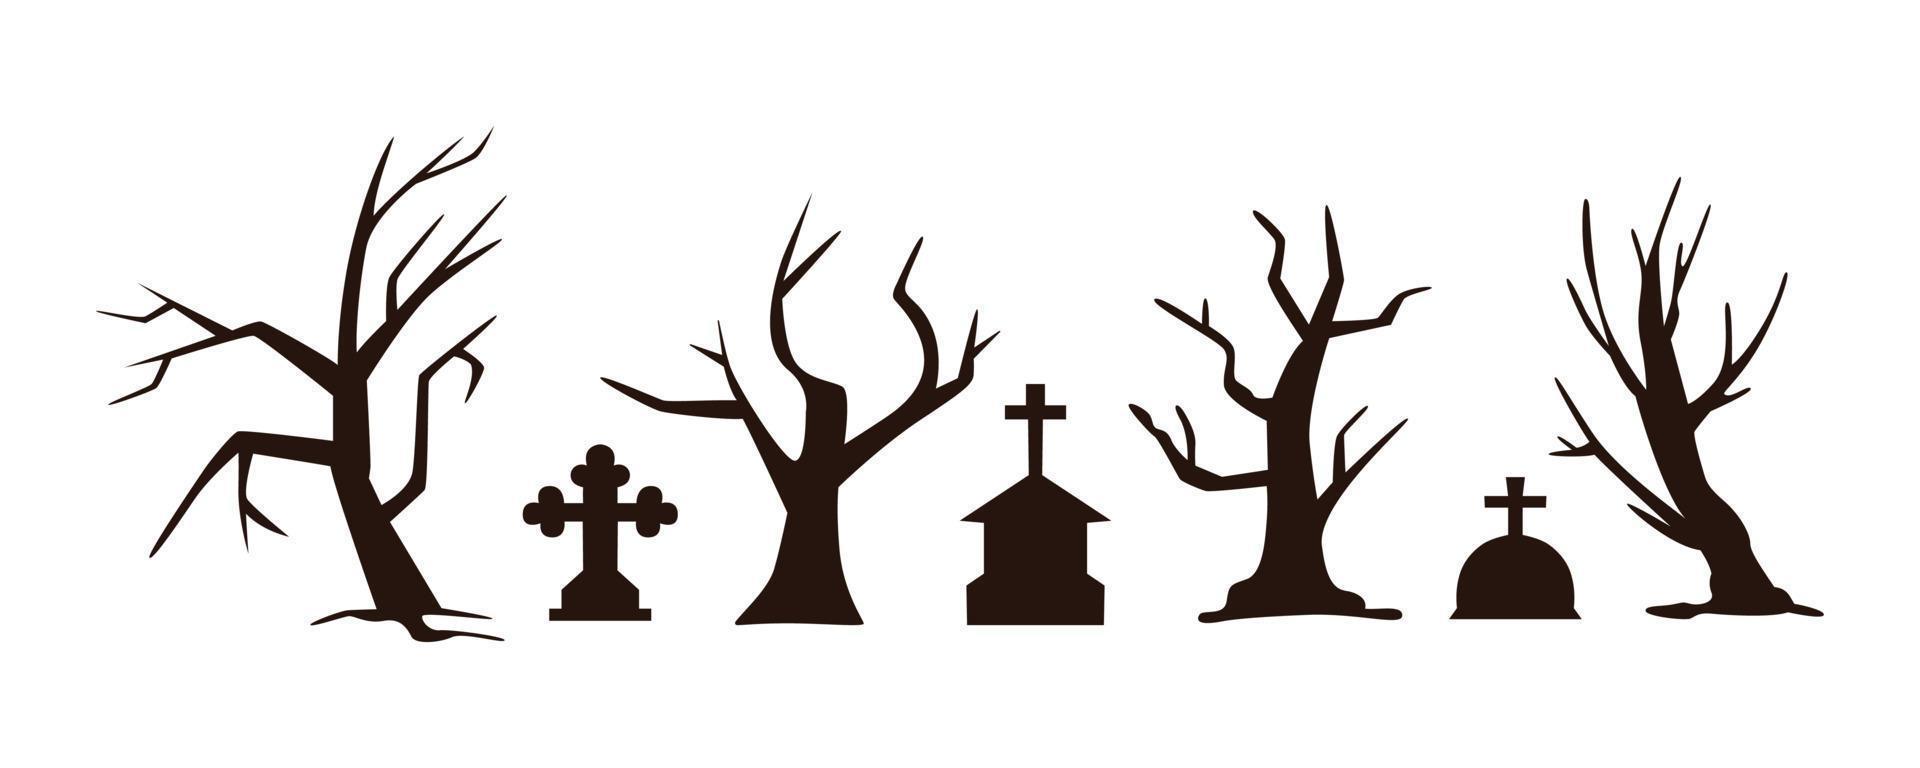 Creepy Halloween graveyard headstones coffins vector collection. Spooky trees silhouettes